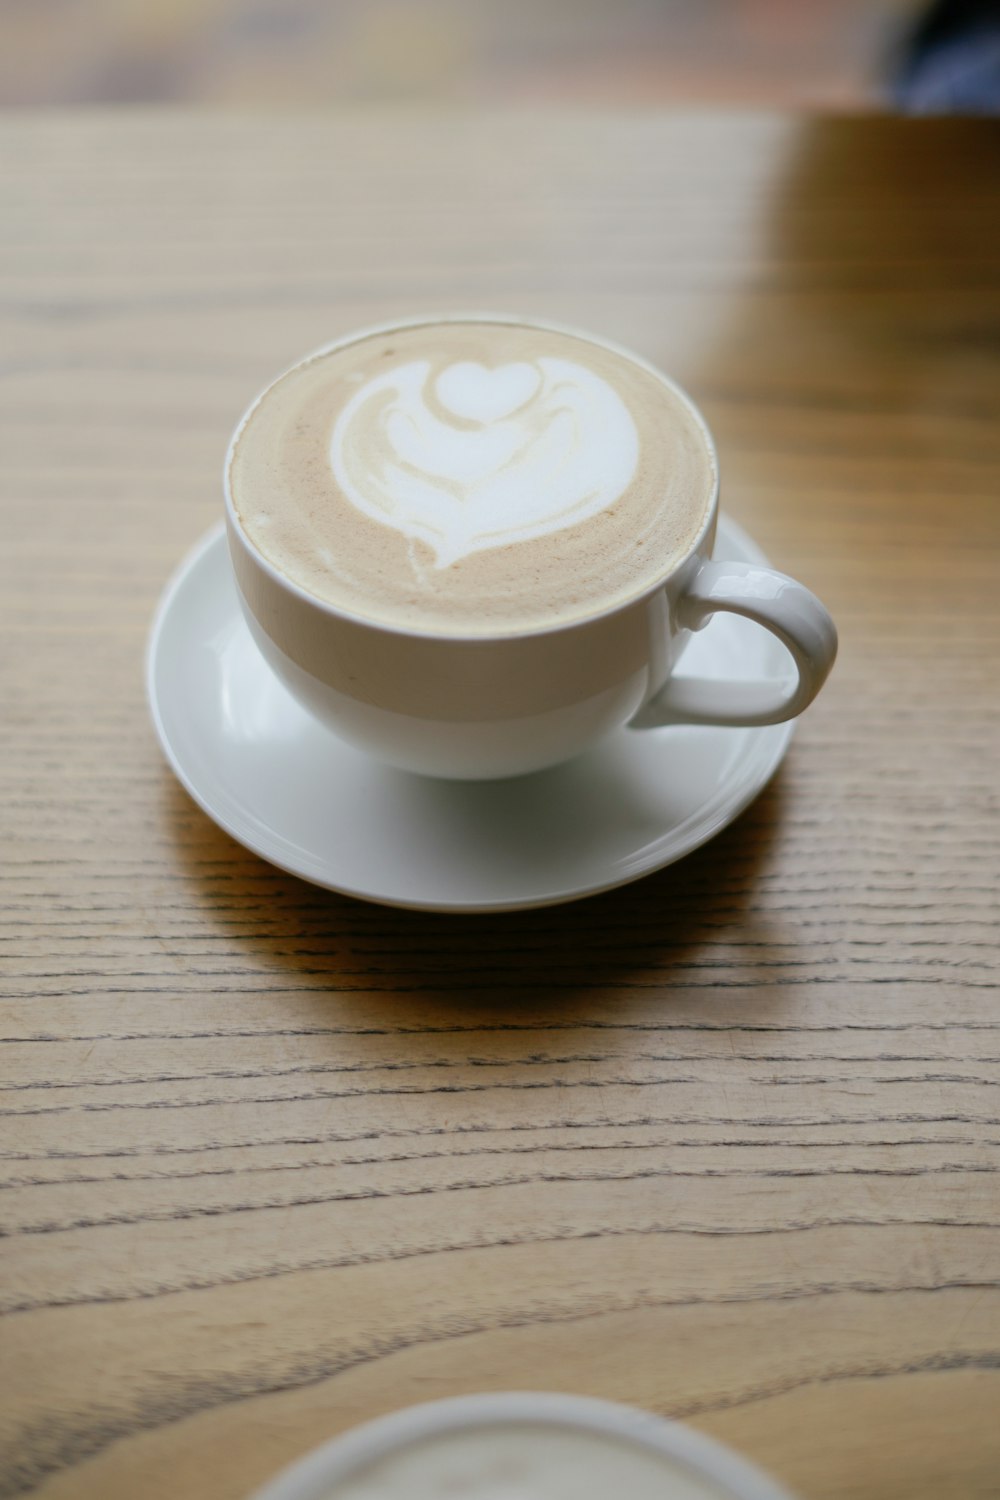 a white cup with a white foamy substance on a wooden surface